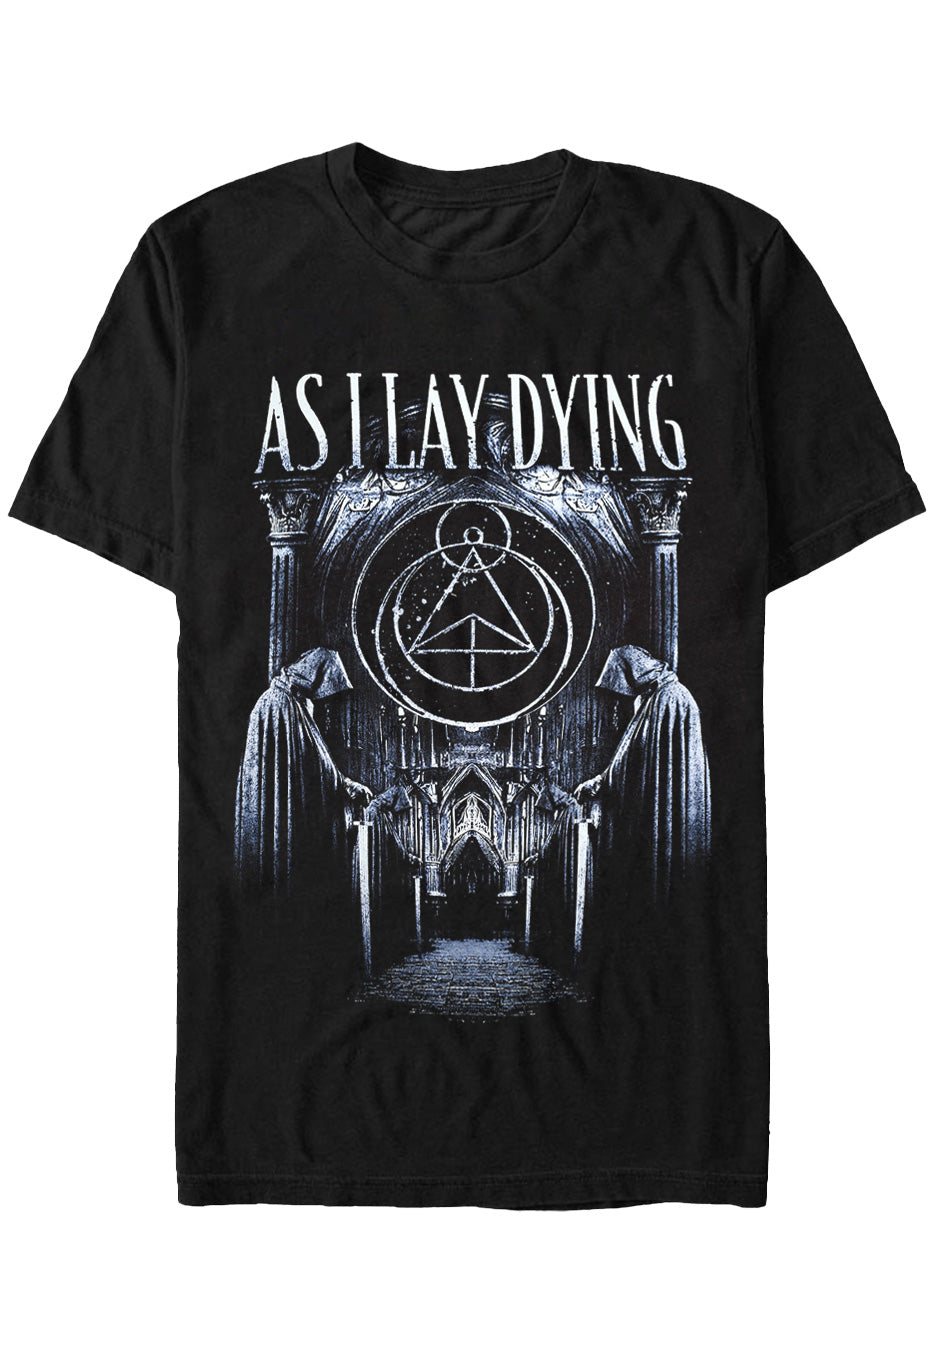 As I Lay Dying - Cathedral - T-Shirt